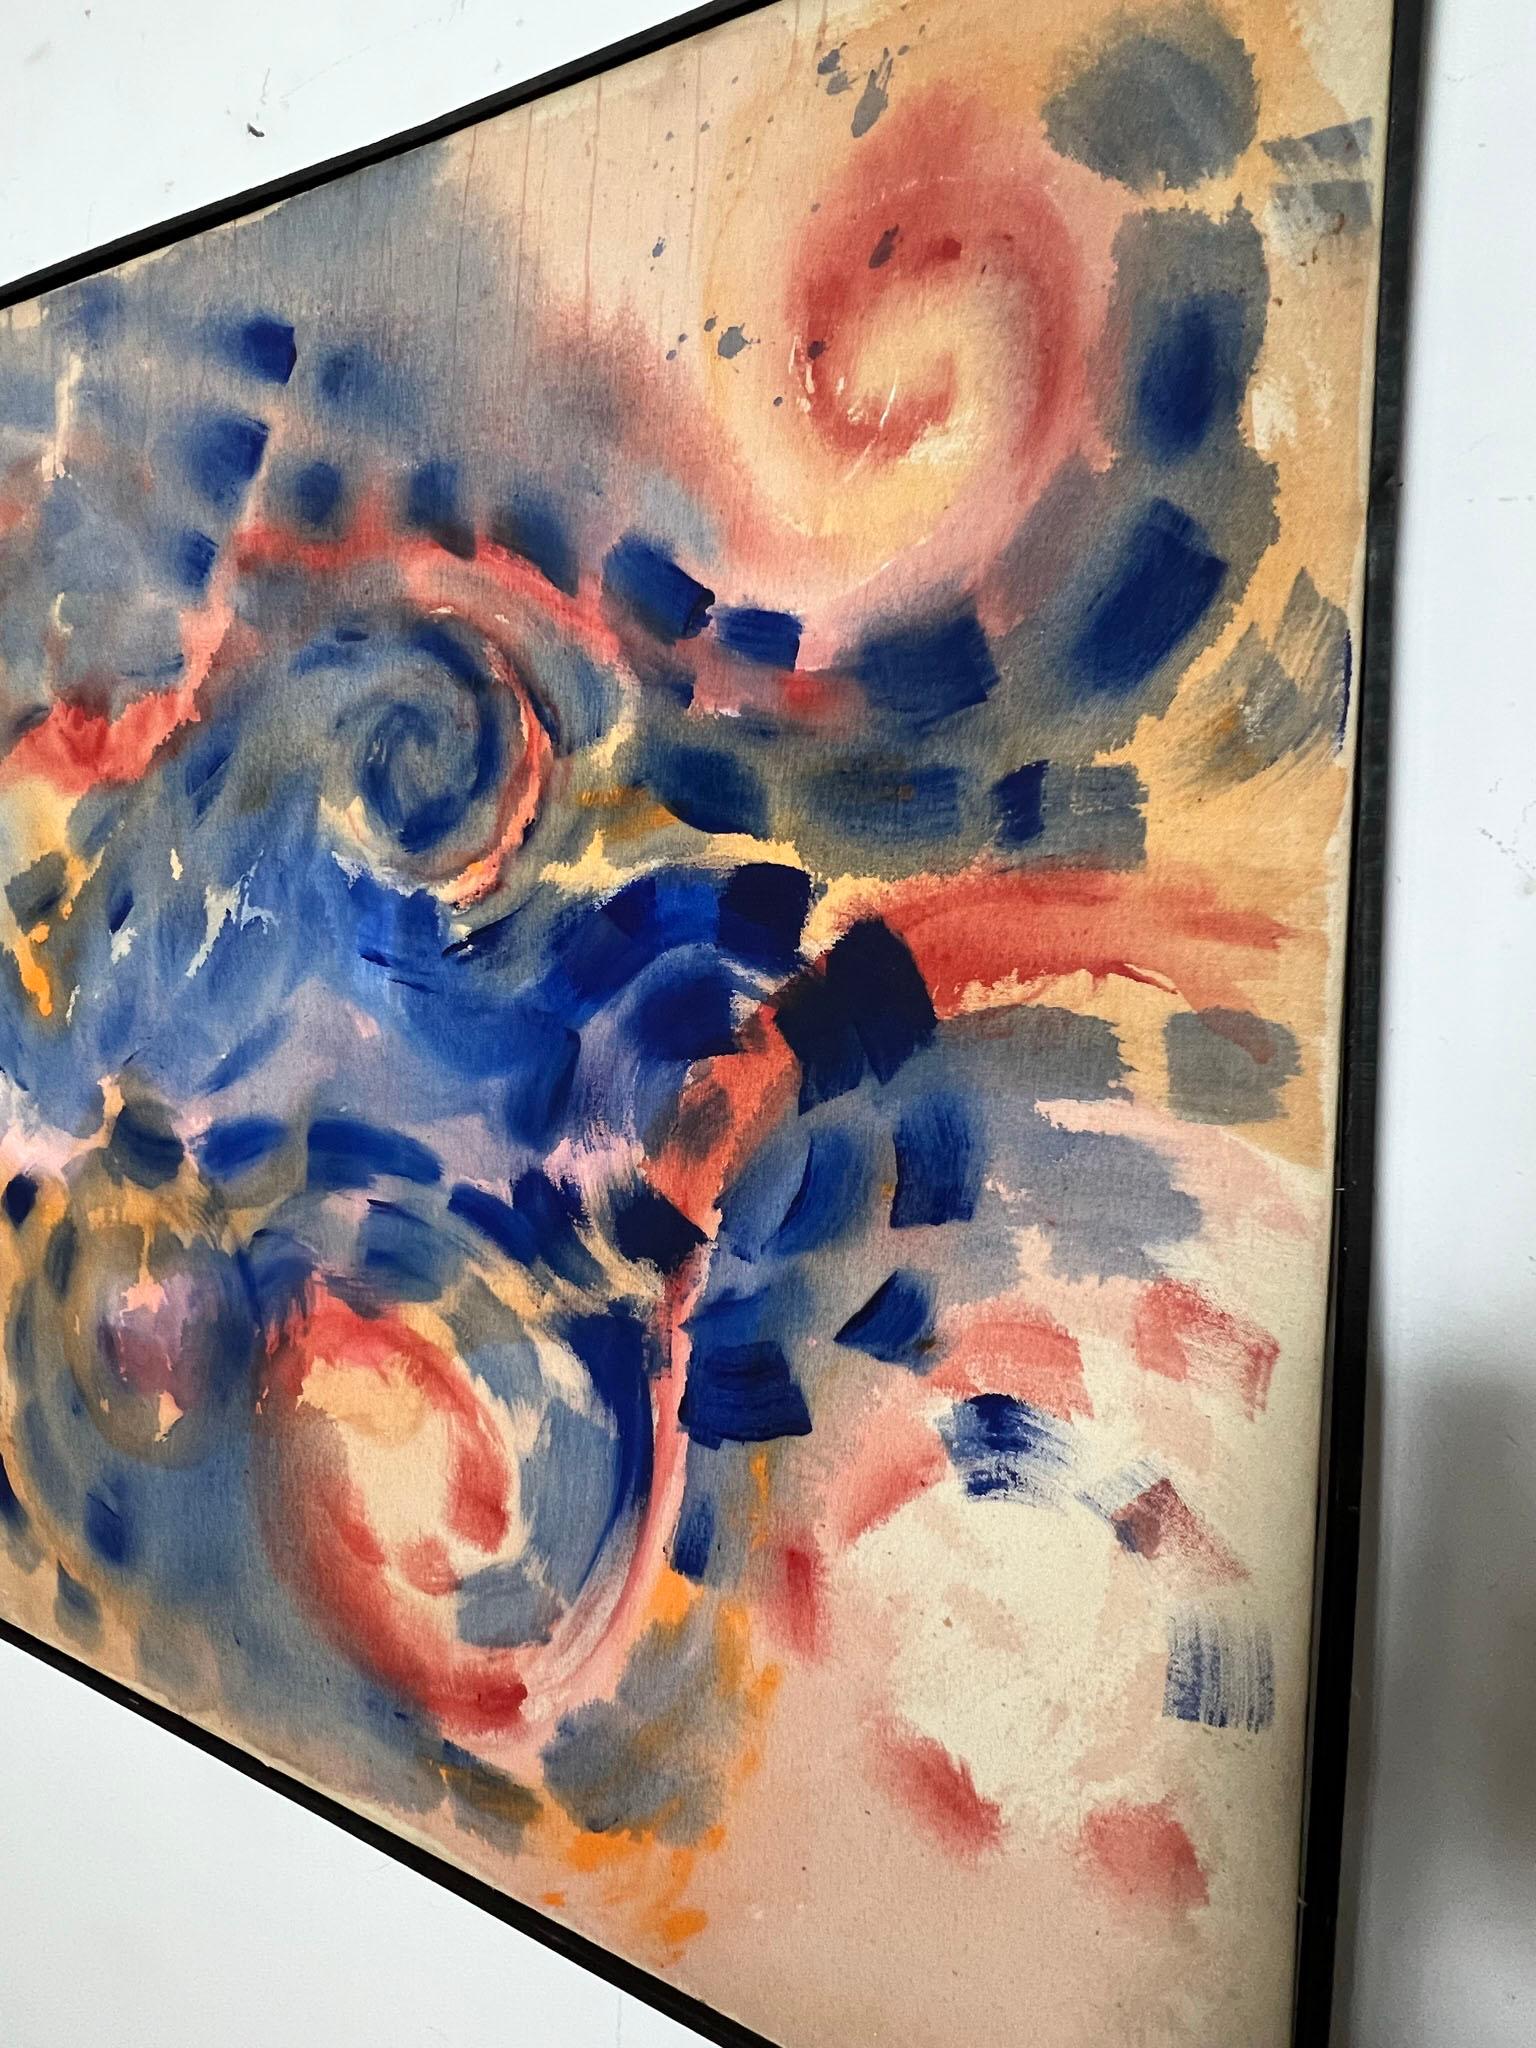 A motion filled stain painting signed Gladys Benoit, ca. 1970s.